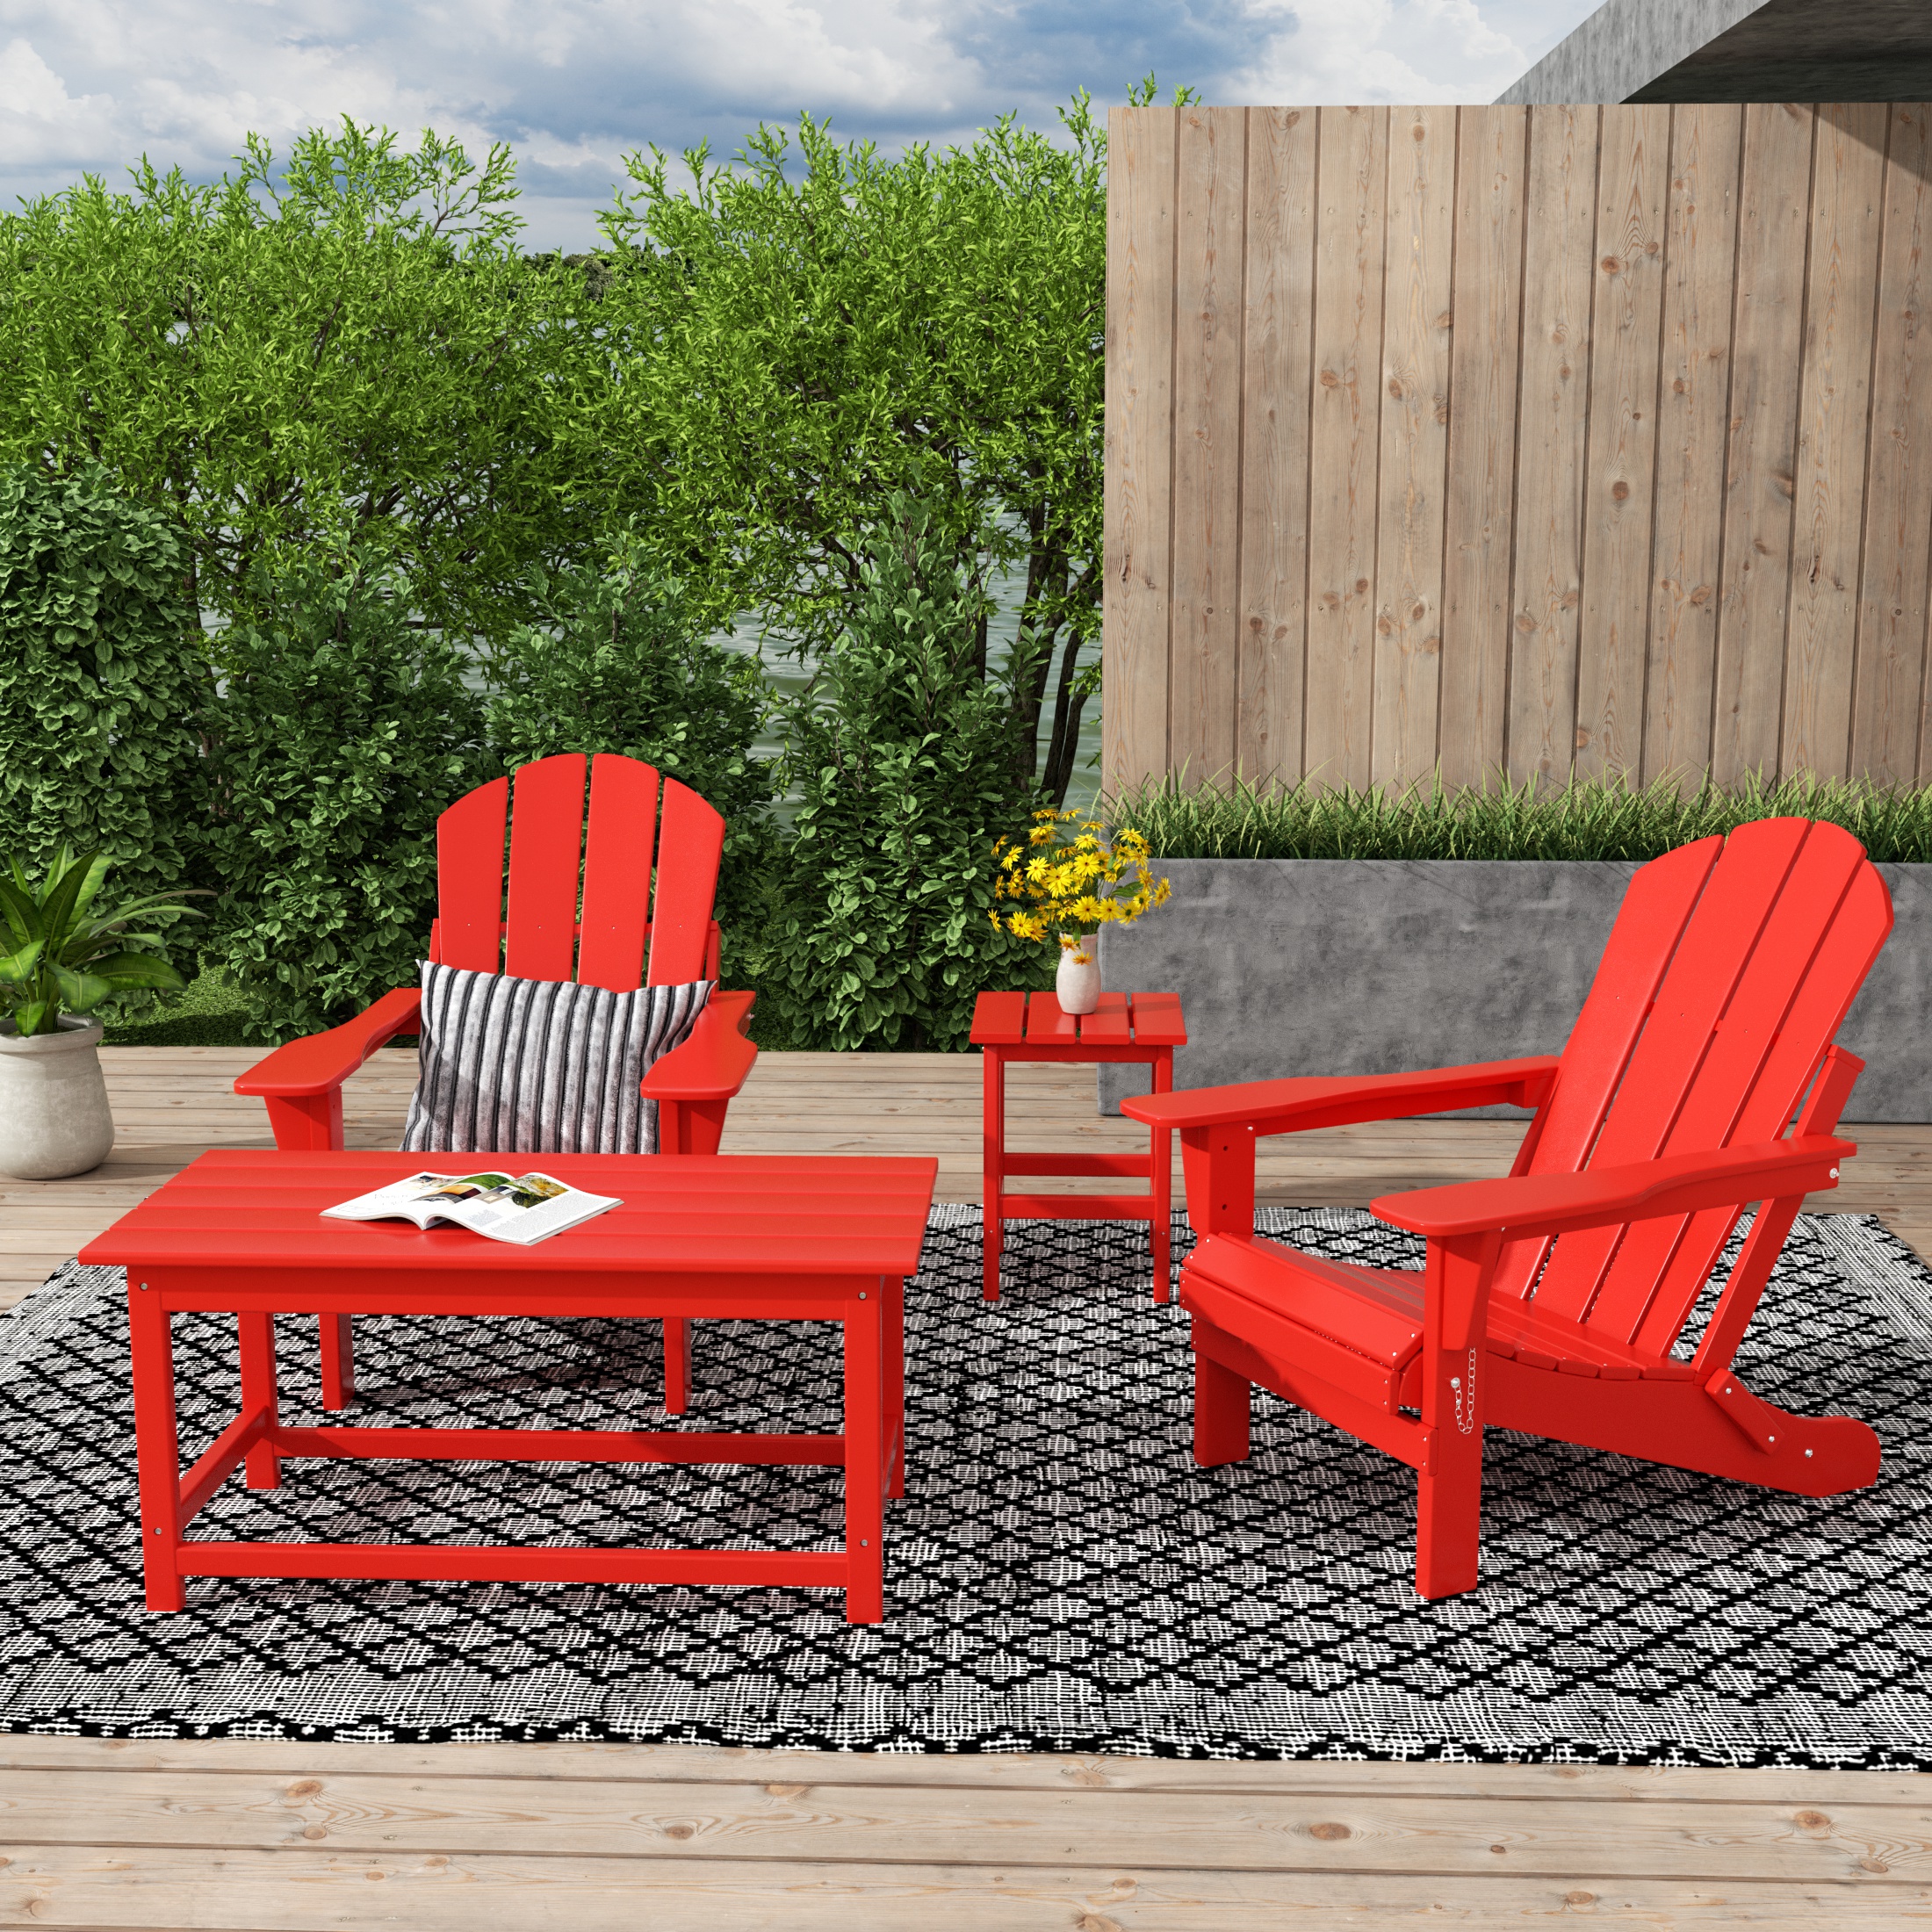 WestinTrends Malibu 4-Pieces Outdoor Patio Furniture Set, All Weather Outdoor Seating Plastic Adirondack Chair Set of 2 with Coffee Table and Side Table, Red - image 2 of 7